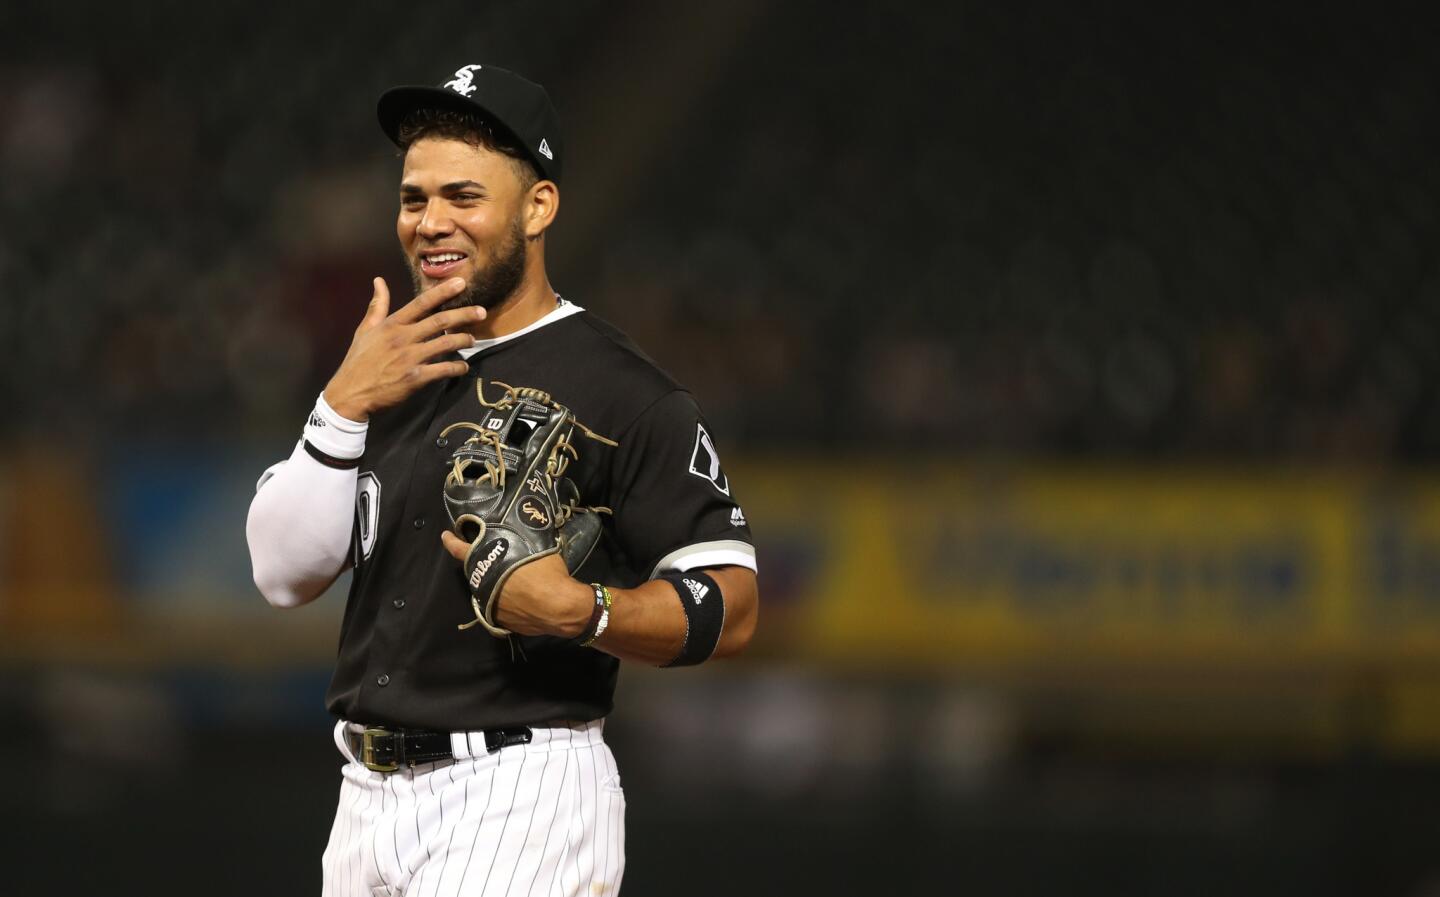 White Sox second baseman Yoan Moncada laughs during a break in the action in the ninth inning of a game against the Indians at Guaranteed Rate Field on Tuesday, June 12, 2018.